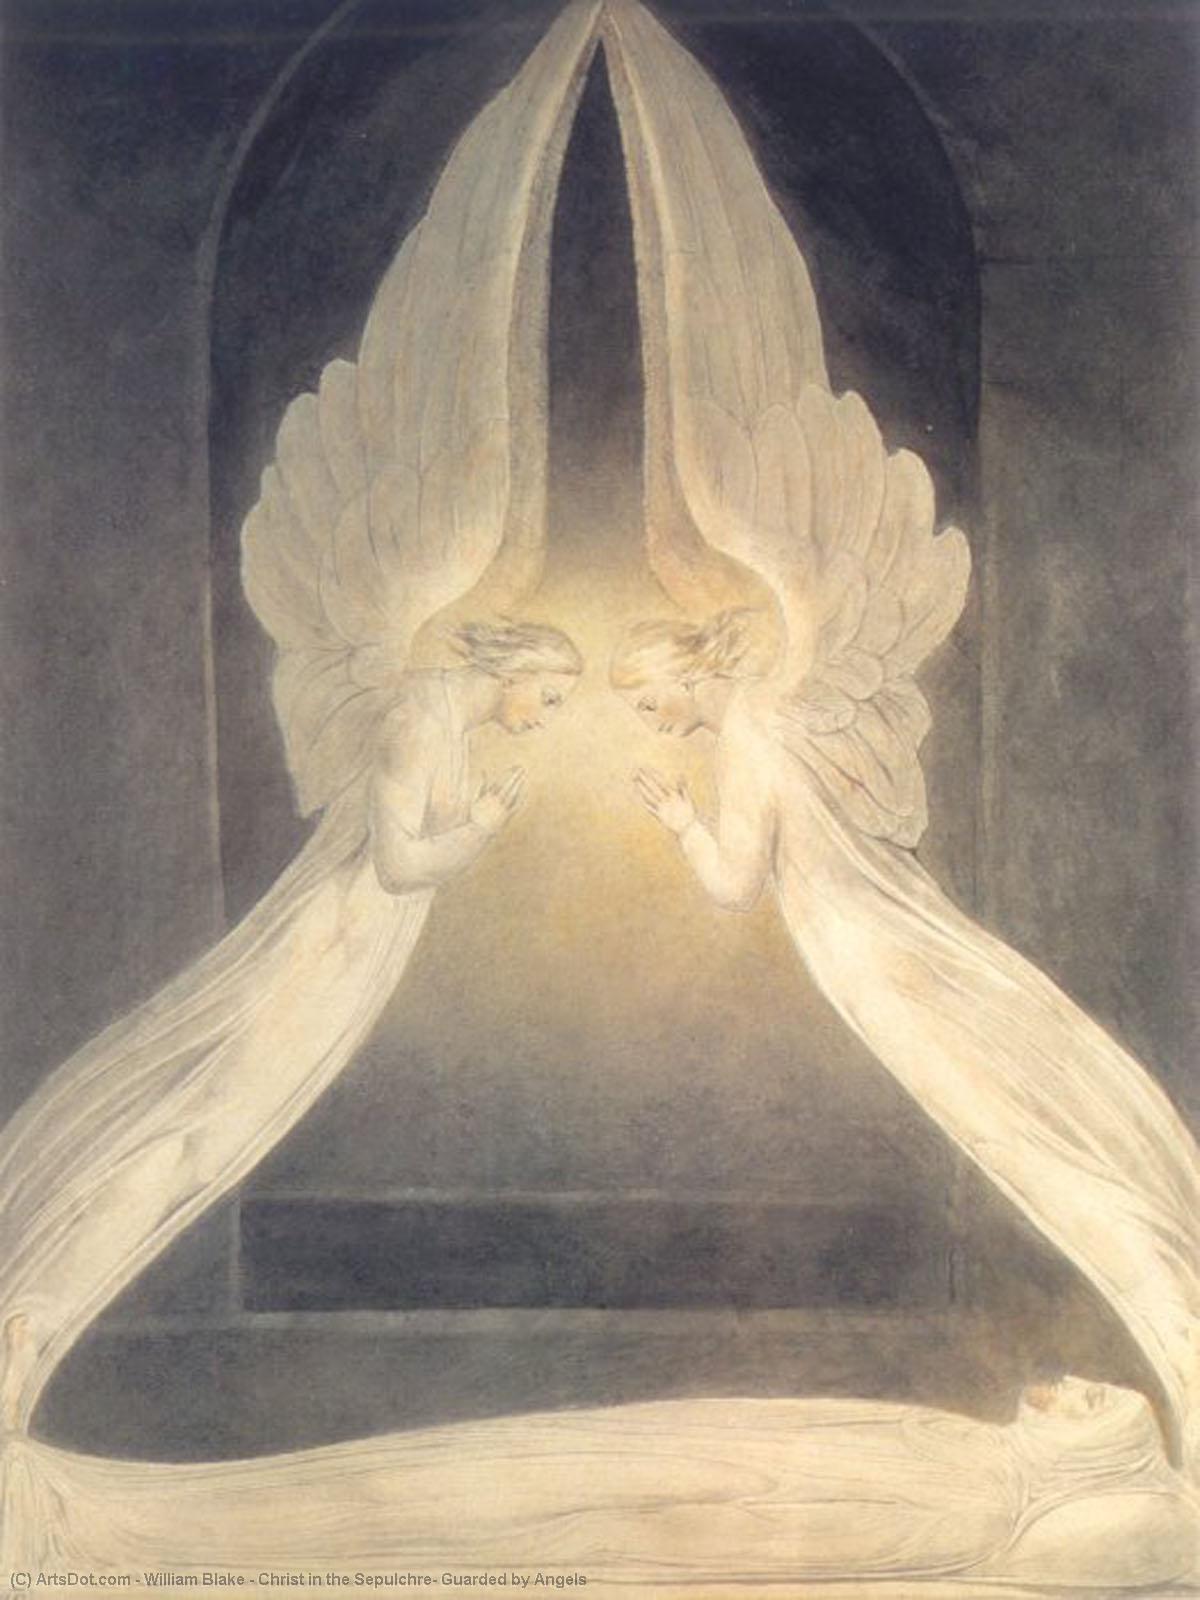 WikiOO.org - 백과 사전 - 회화, 삽화 William Blake - Christ in the Sepulchre, Guarded by Angels